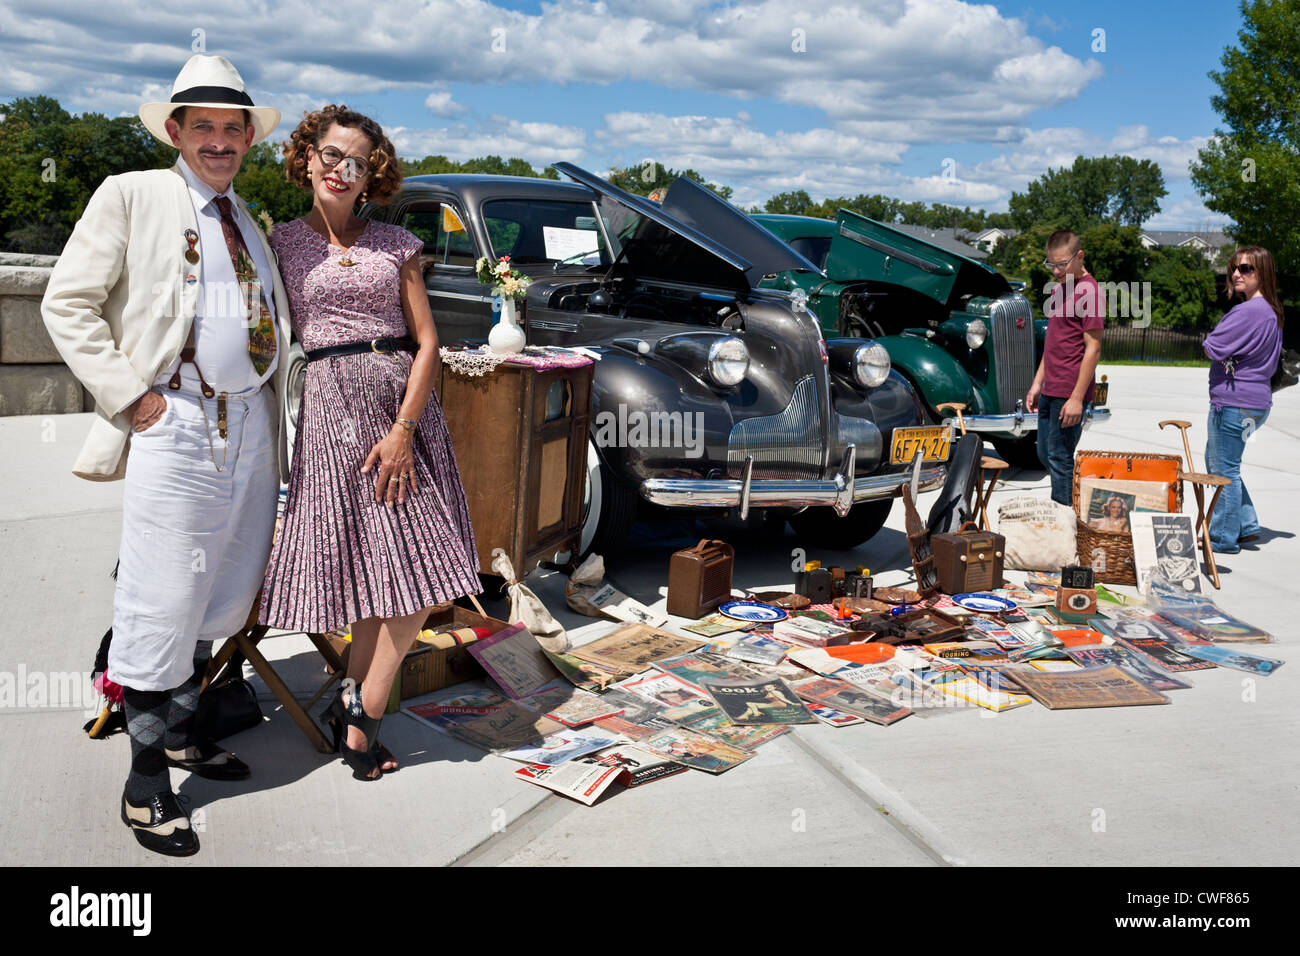 Couple with their 1939 Buick Roadmaster, dressing the part at a Buick car show in Troy, New York State Stock Photo